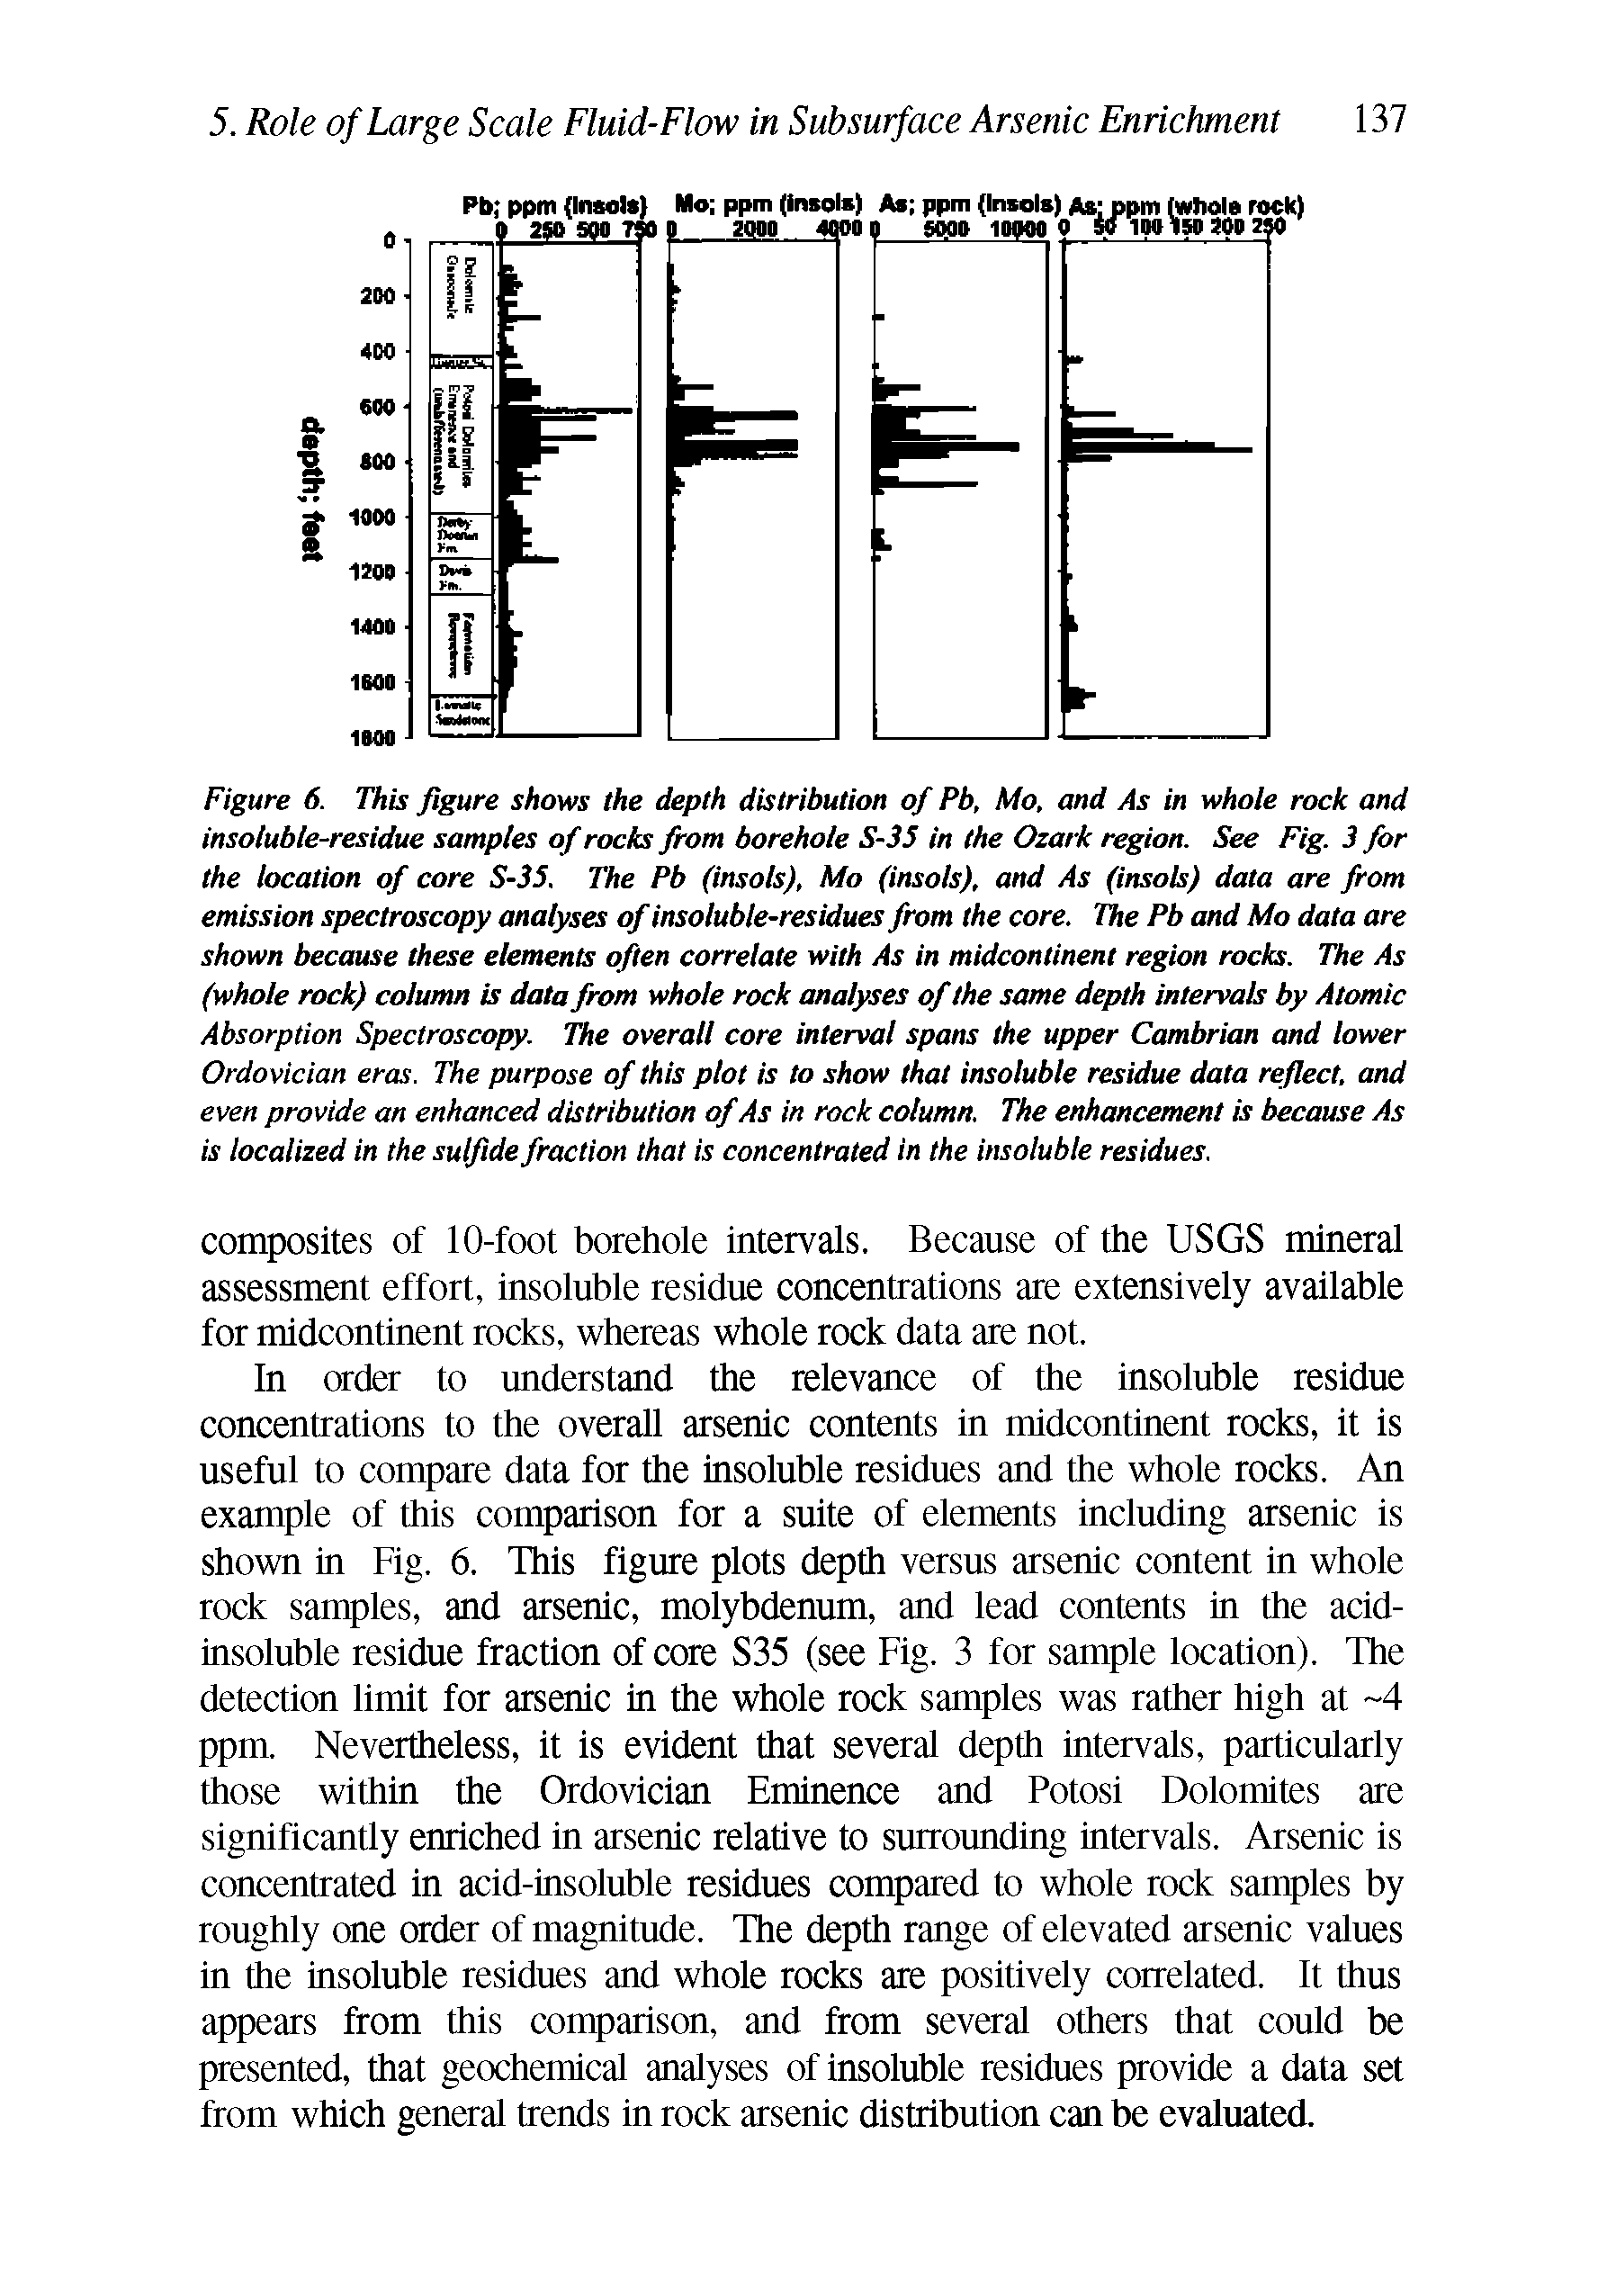 Figure 6. This figure shows the depth distribution of Pb, Mo, and As in whole rock and insoluble-residue samples of rocks from borehole S-35 in the Ozark region. See Fig. 3 for the location of core S-35. The Pb (insols). Mo (insols), and As (insols) data are from emission spectroscopy analyses of insoluble-residues from the core. The Pb and Mo data are shown because these elements often correlate with As in midcontinent region rocks. The As (whole rock) column is data from whole rock analyses of the same depth intervals by Atomic Absorption Spectroscopy. The overall core interval spans the upper Cambrian and lower Ordo vician eras. The purpose of this plot is to show that insoluble residue data reflect, and even provide an enhanced distribution of As in rock column. The enhancement is because As is localized in the sulfide fraction that is concentrated in the insoluble residues.